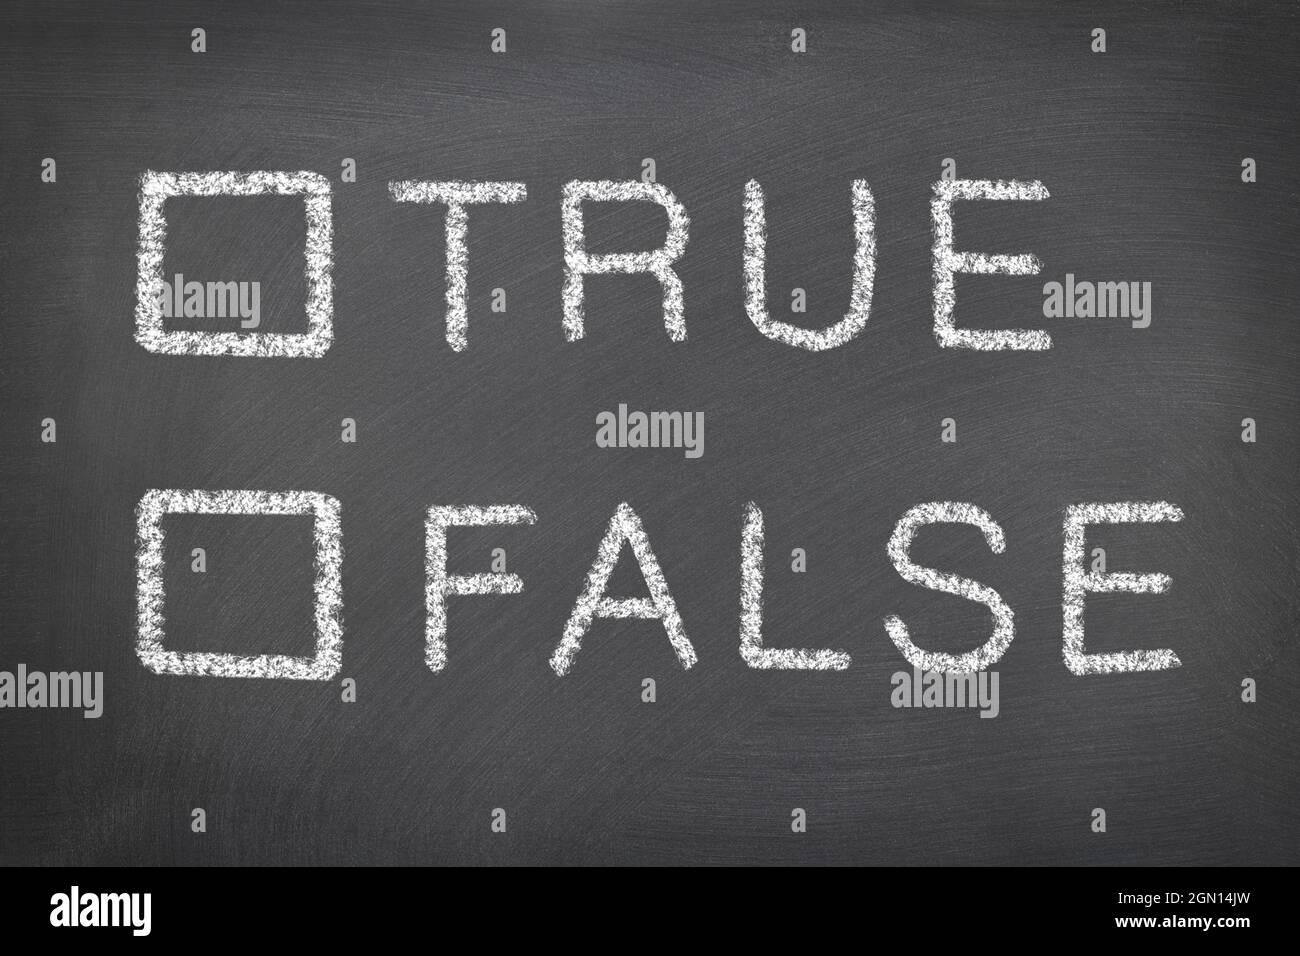 Diagram on written on a chalkboard to check mark true or false of any issue. Stock Photo